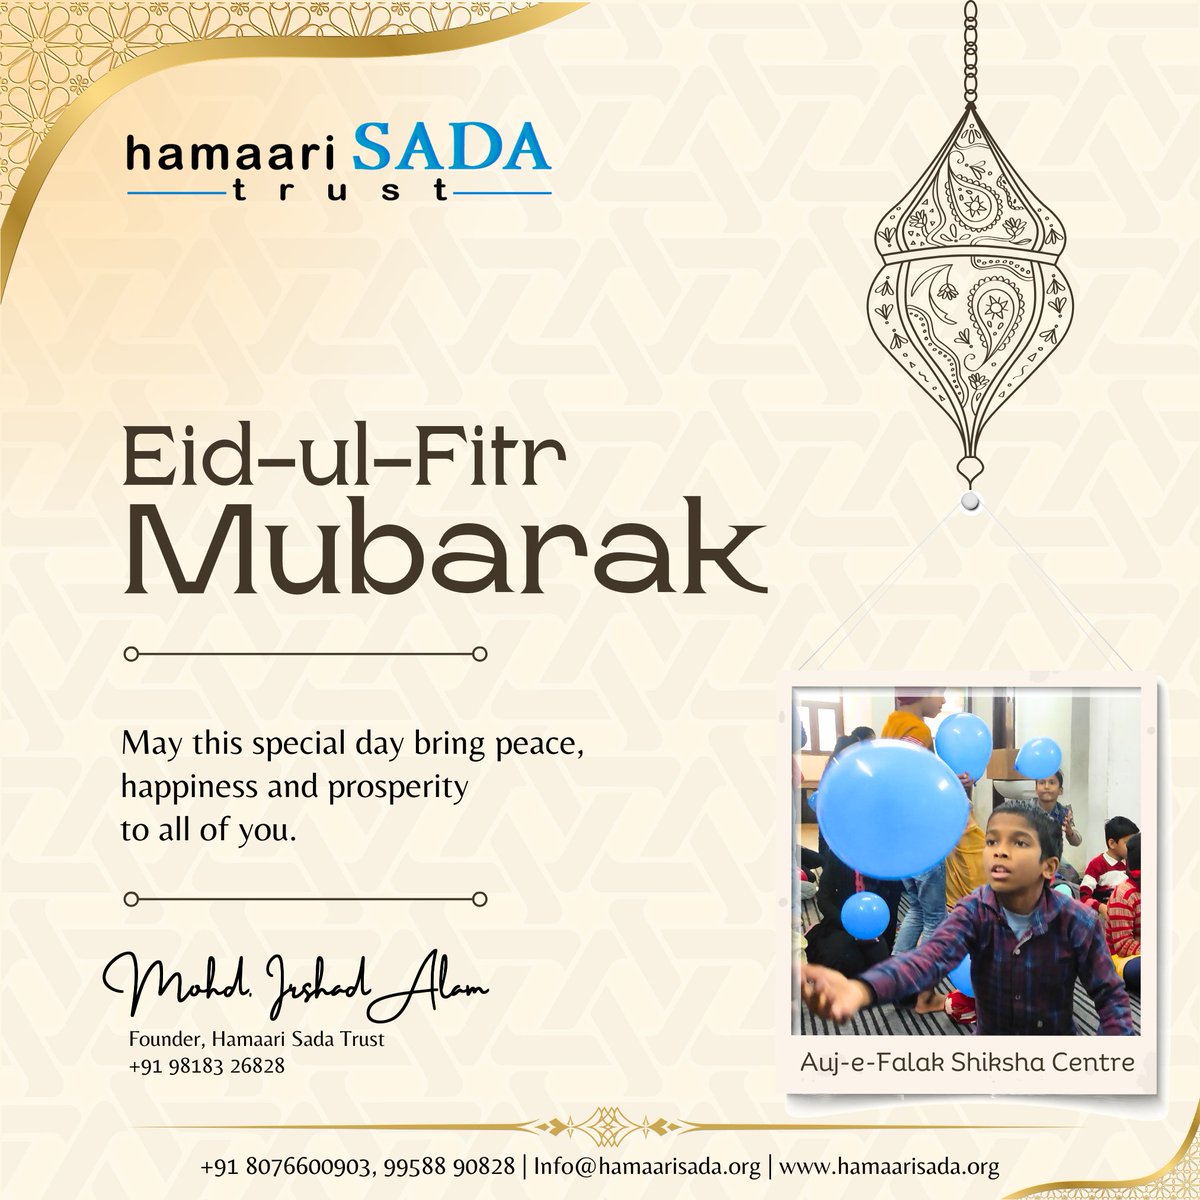 Eid-ul-Fitr Mubarak! May this special day bring peace, happiness and prosperity to all of you. Mohd. Irshad Alam Founder, Hamaari Sada Trust #EidMubarak #EidAlFitr2024 #Eid2024 #Eidmubarak2024 #EidUlFitr #Eid #mialam